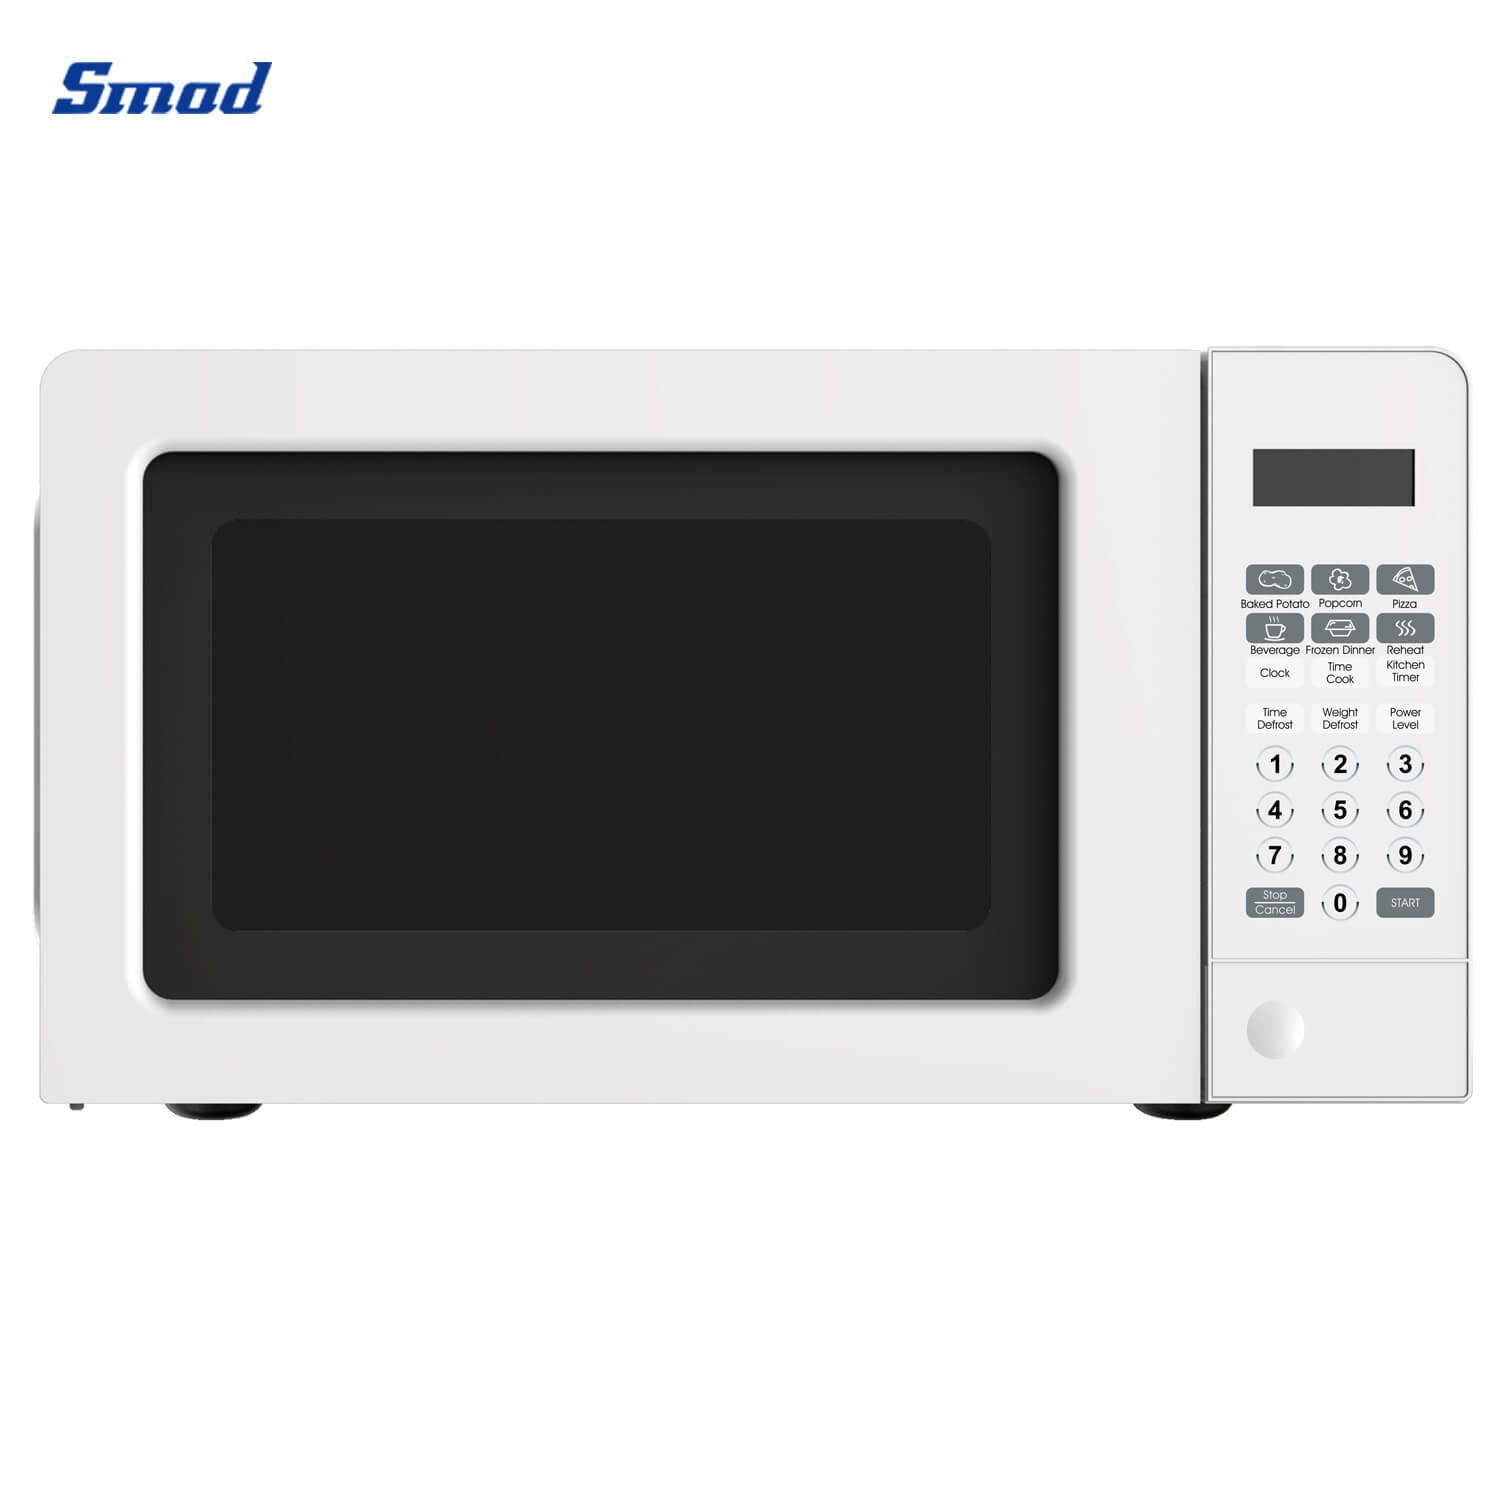  Smad Small Microwave Oven 0.7 Cu.Ft, Mini Microwave Oven with  9.6'' Removable Turntable, 6 Auto Preset Menus, Child Lock, Easy Clean  Interior, Black, 700W : Home & Kitchen